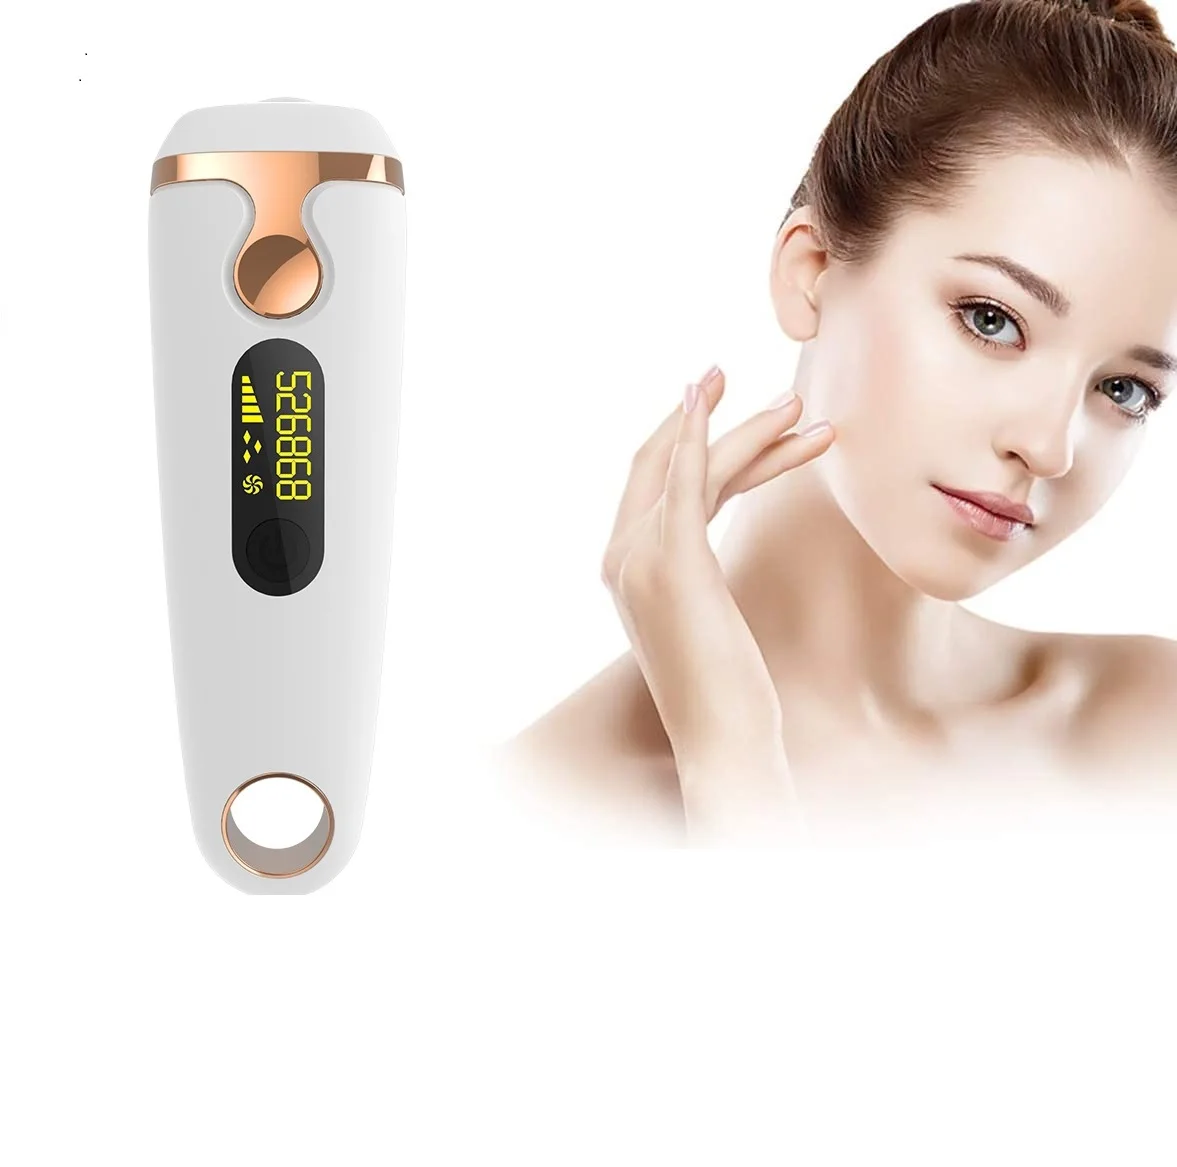 

2021 Hot Seller Painless Ipl Removal From Home Portable Epilator Laser Hair Remover Device Permanent ipl maquina